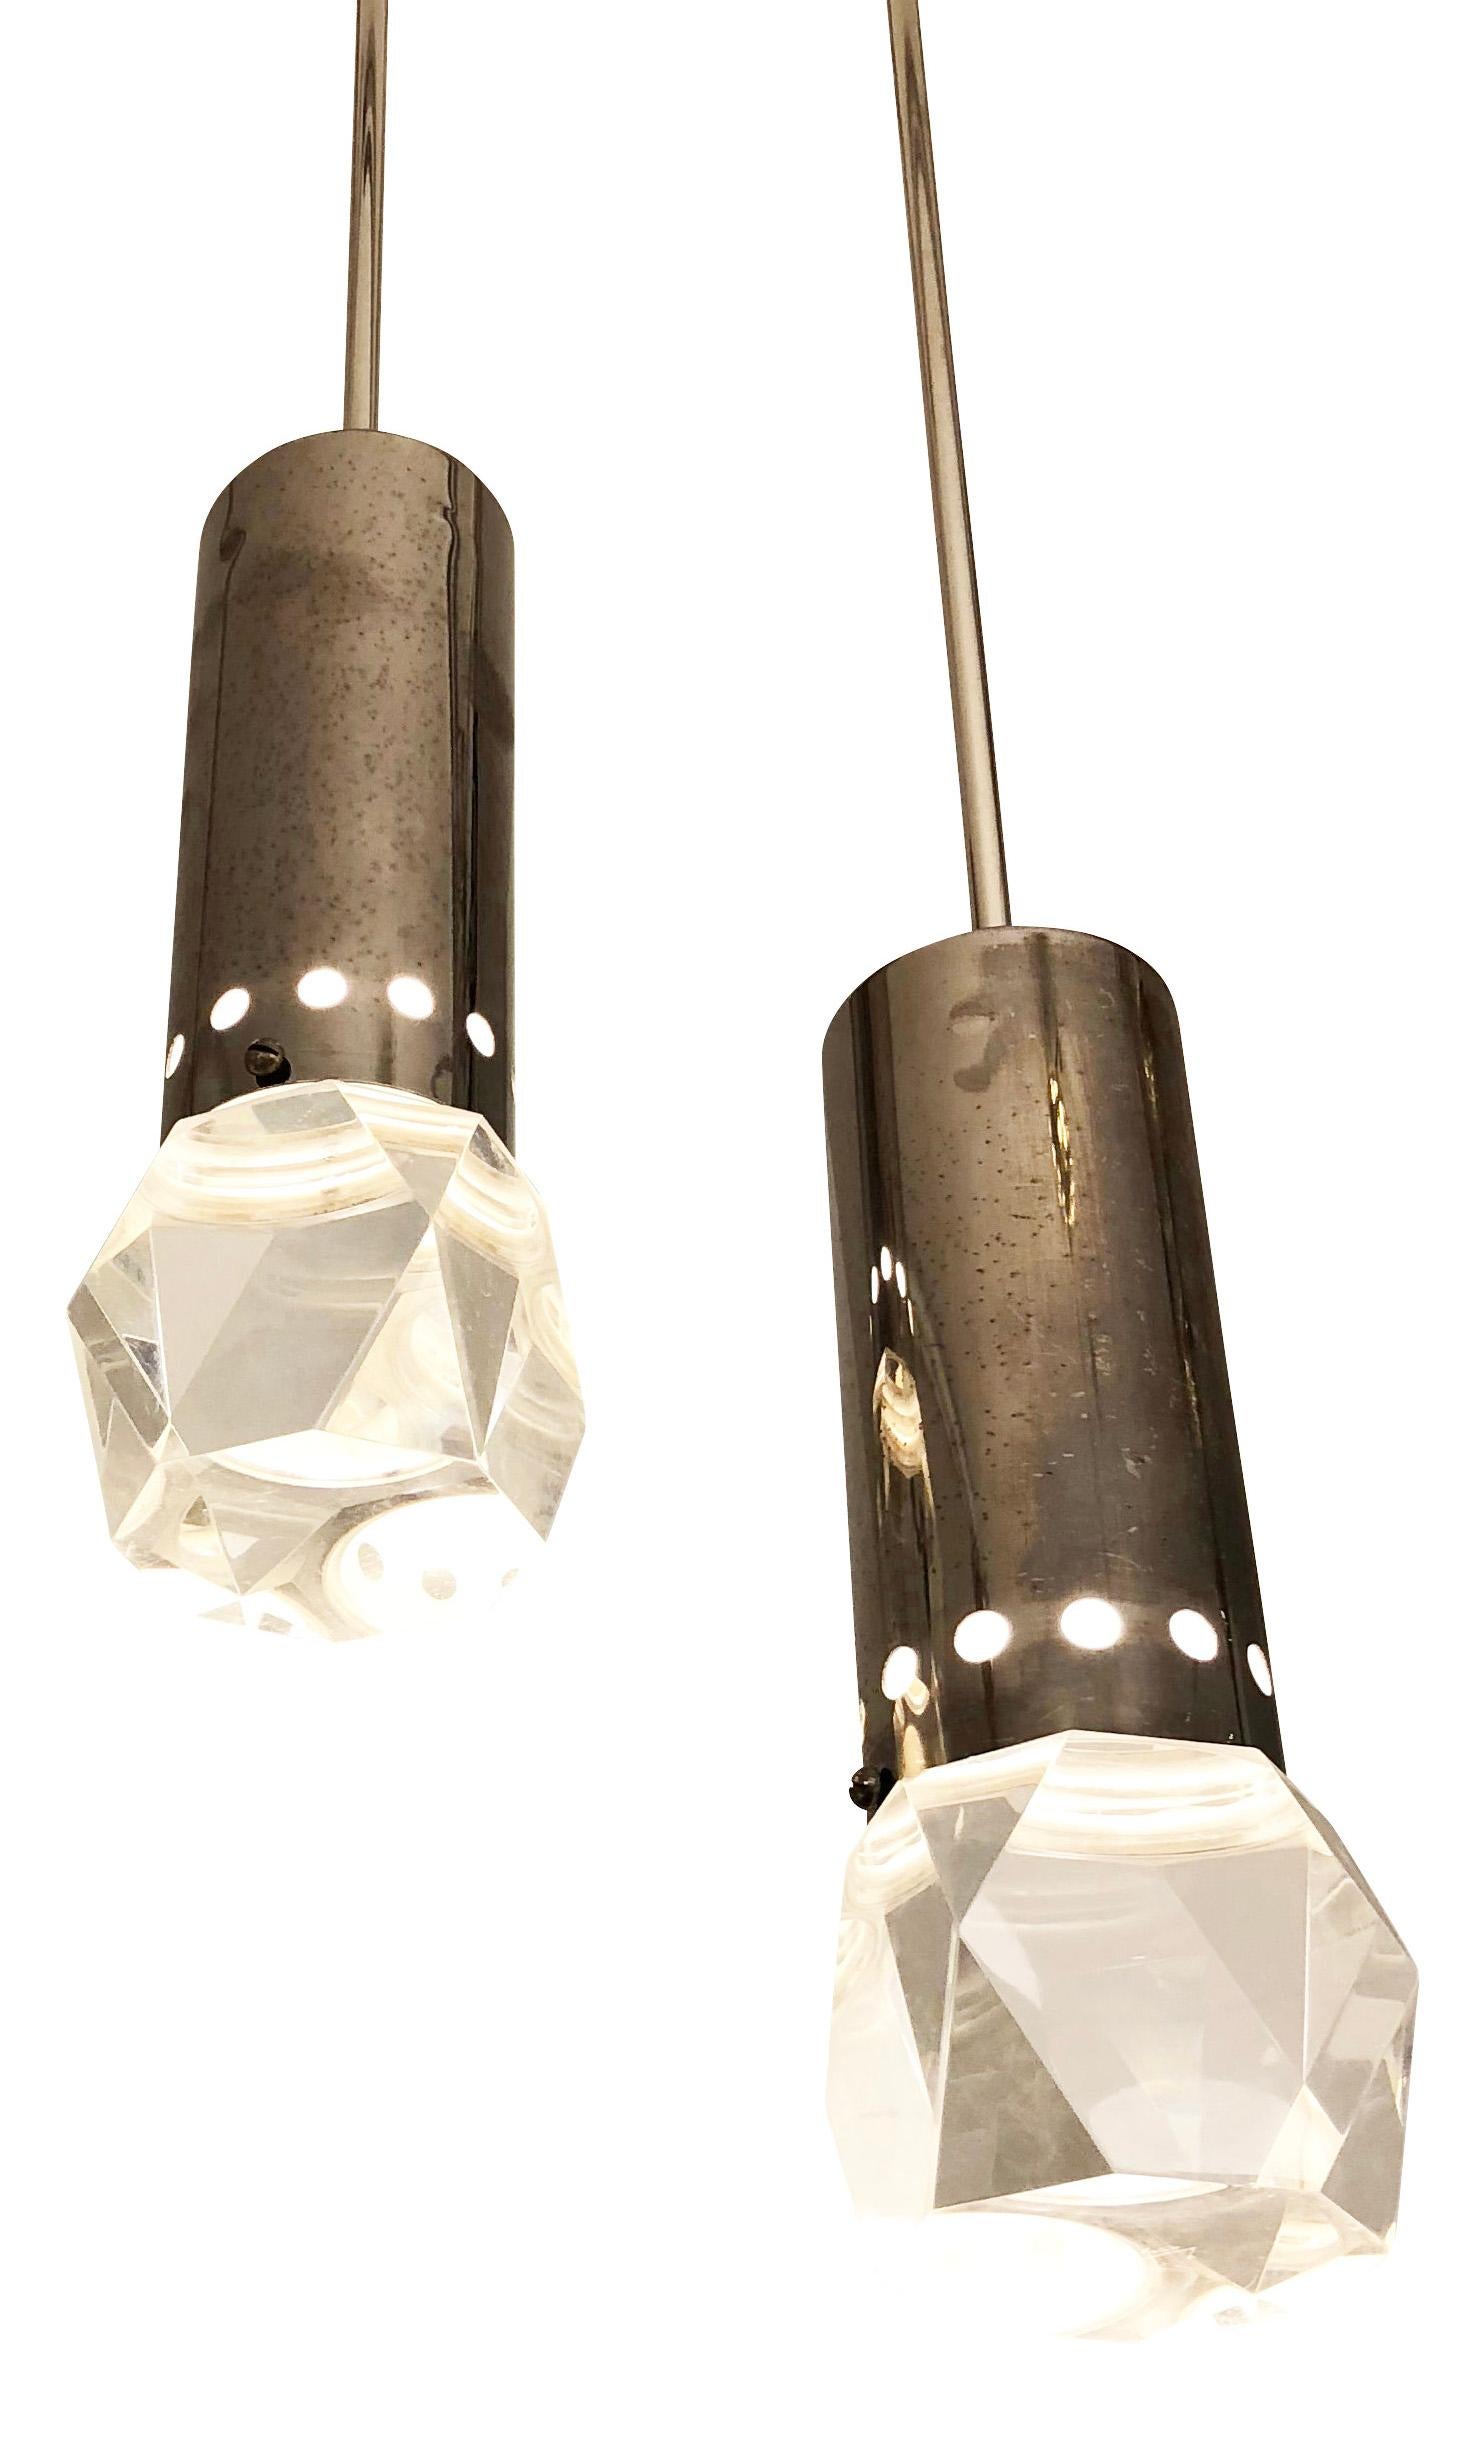 Midcentury pendants by Stilnovo with faceted Lucite shades. The many facets create beautiful light reflections that change as you move around them. Cylindrical hardware is perforated and finished in a dark nickel patina. Can be mounted together on